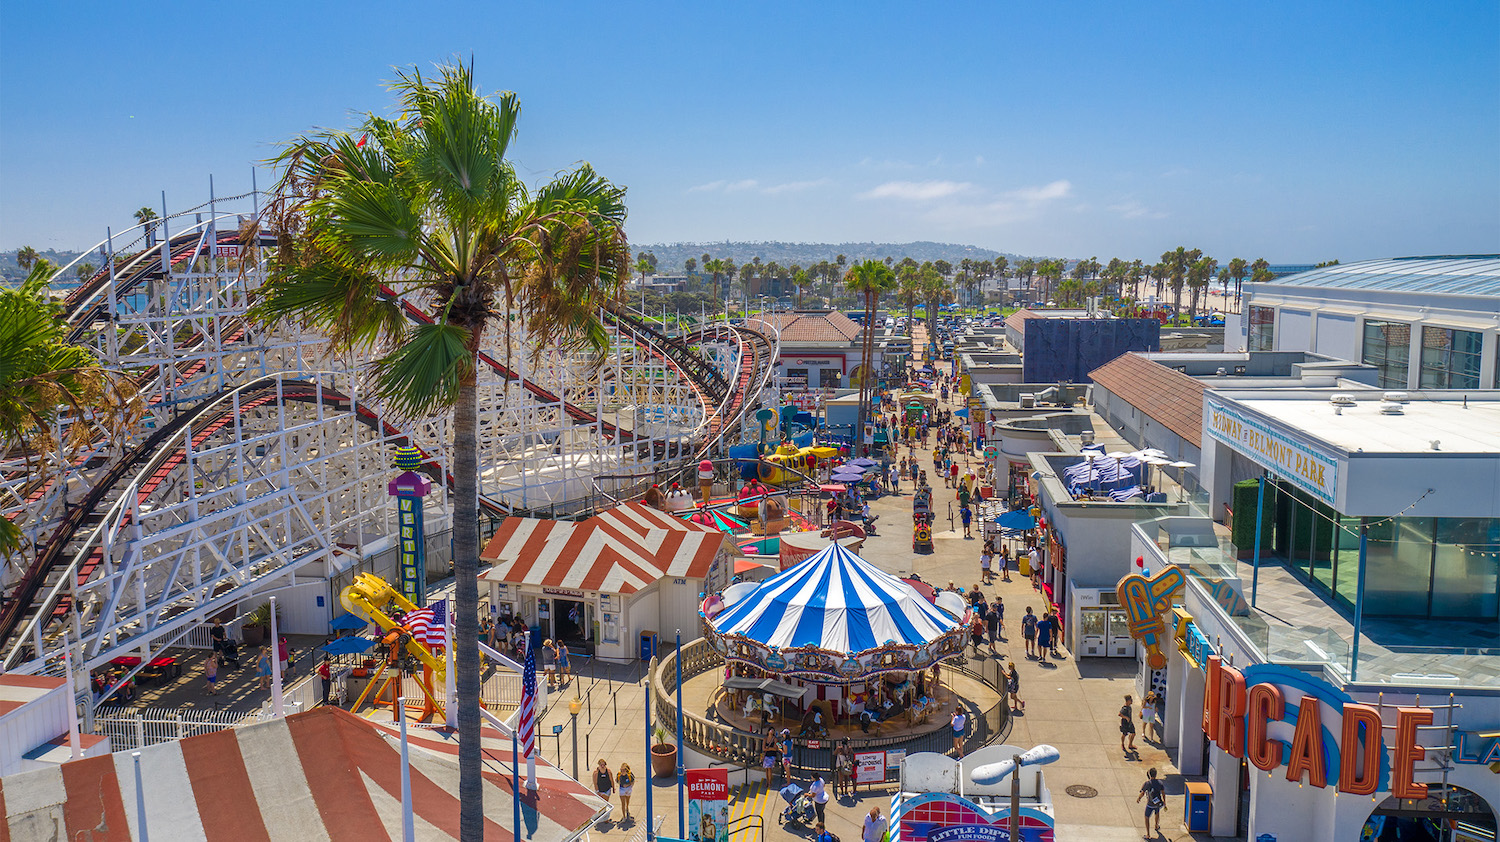 Things to do in San Diego that don't involve alcohol featuring Belmont Park and roller coasters